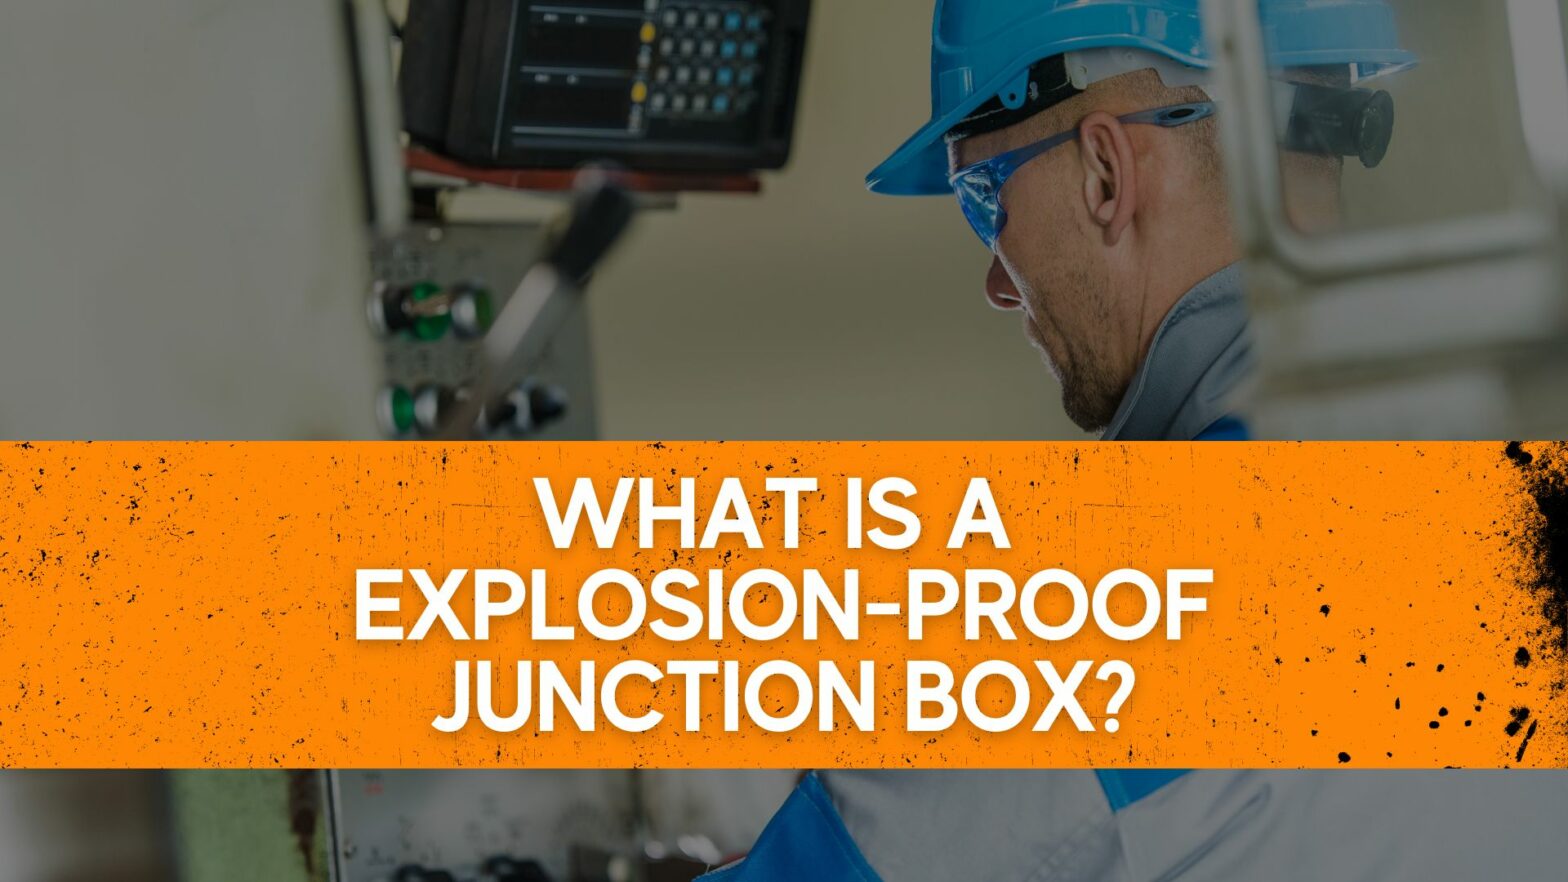 What is a Explosion-proof junction box